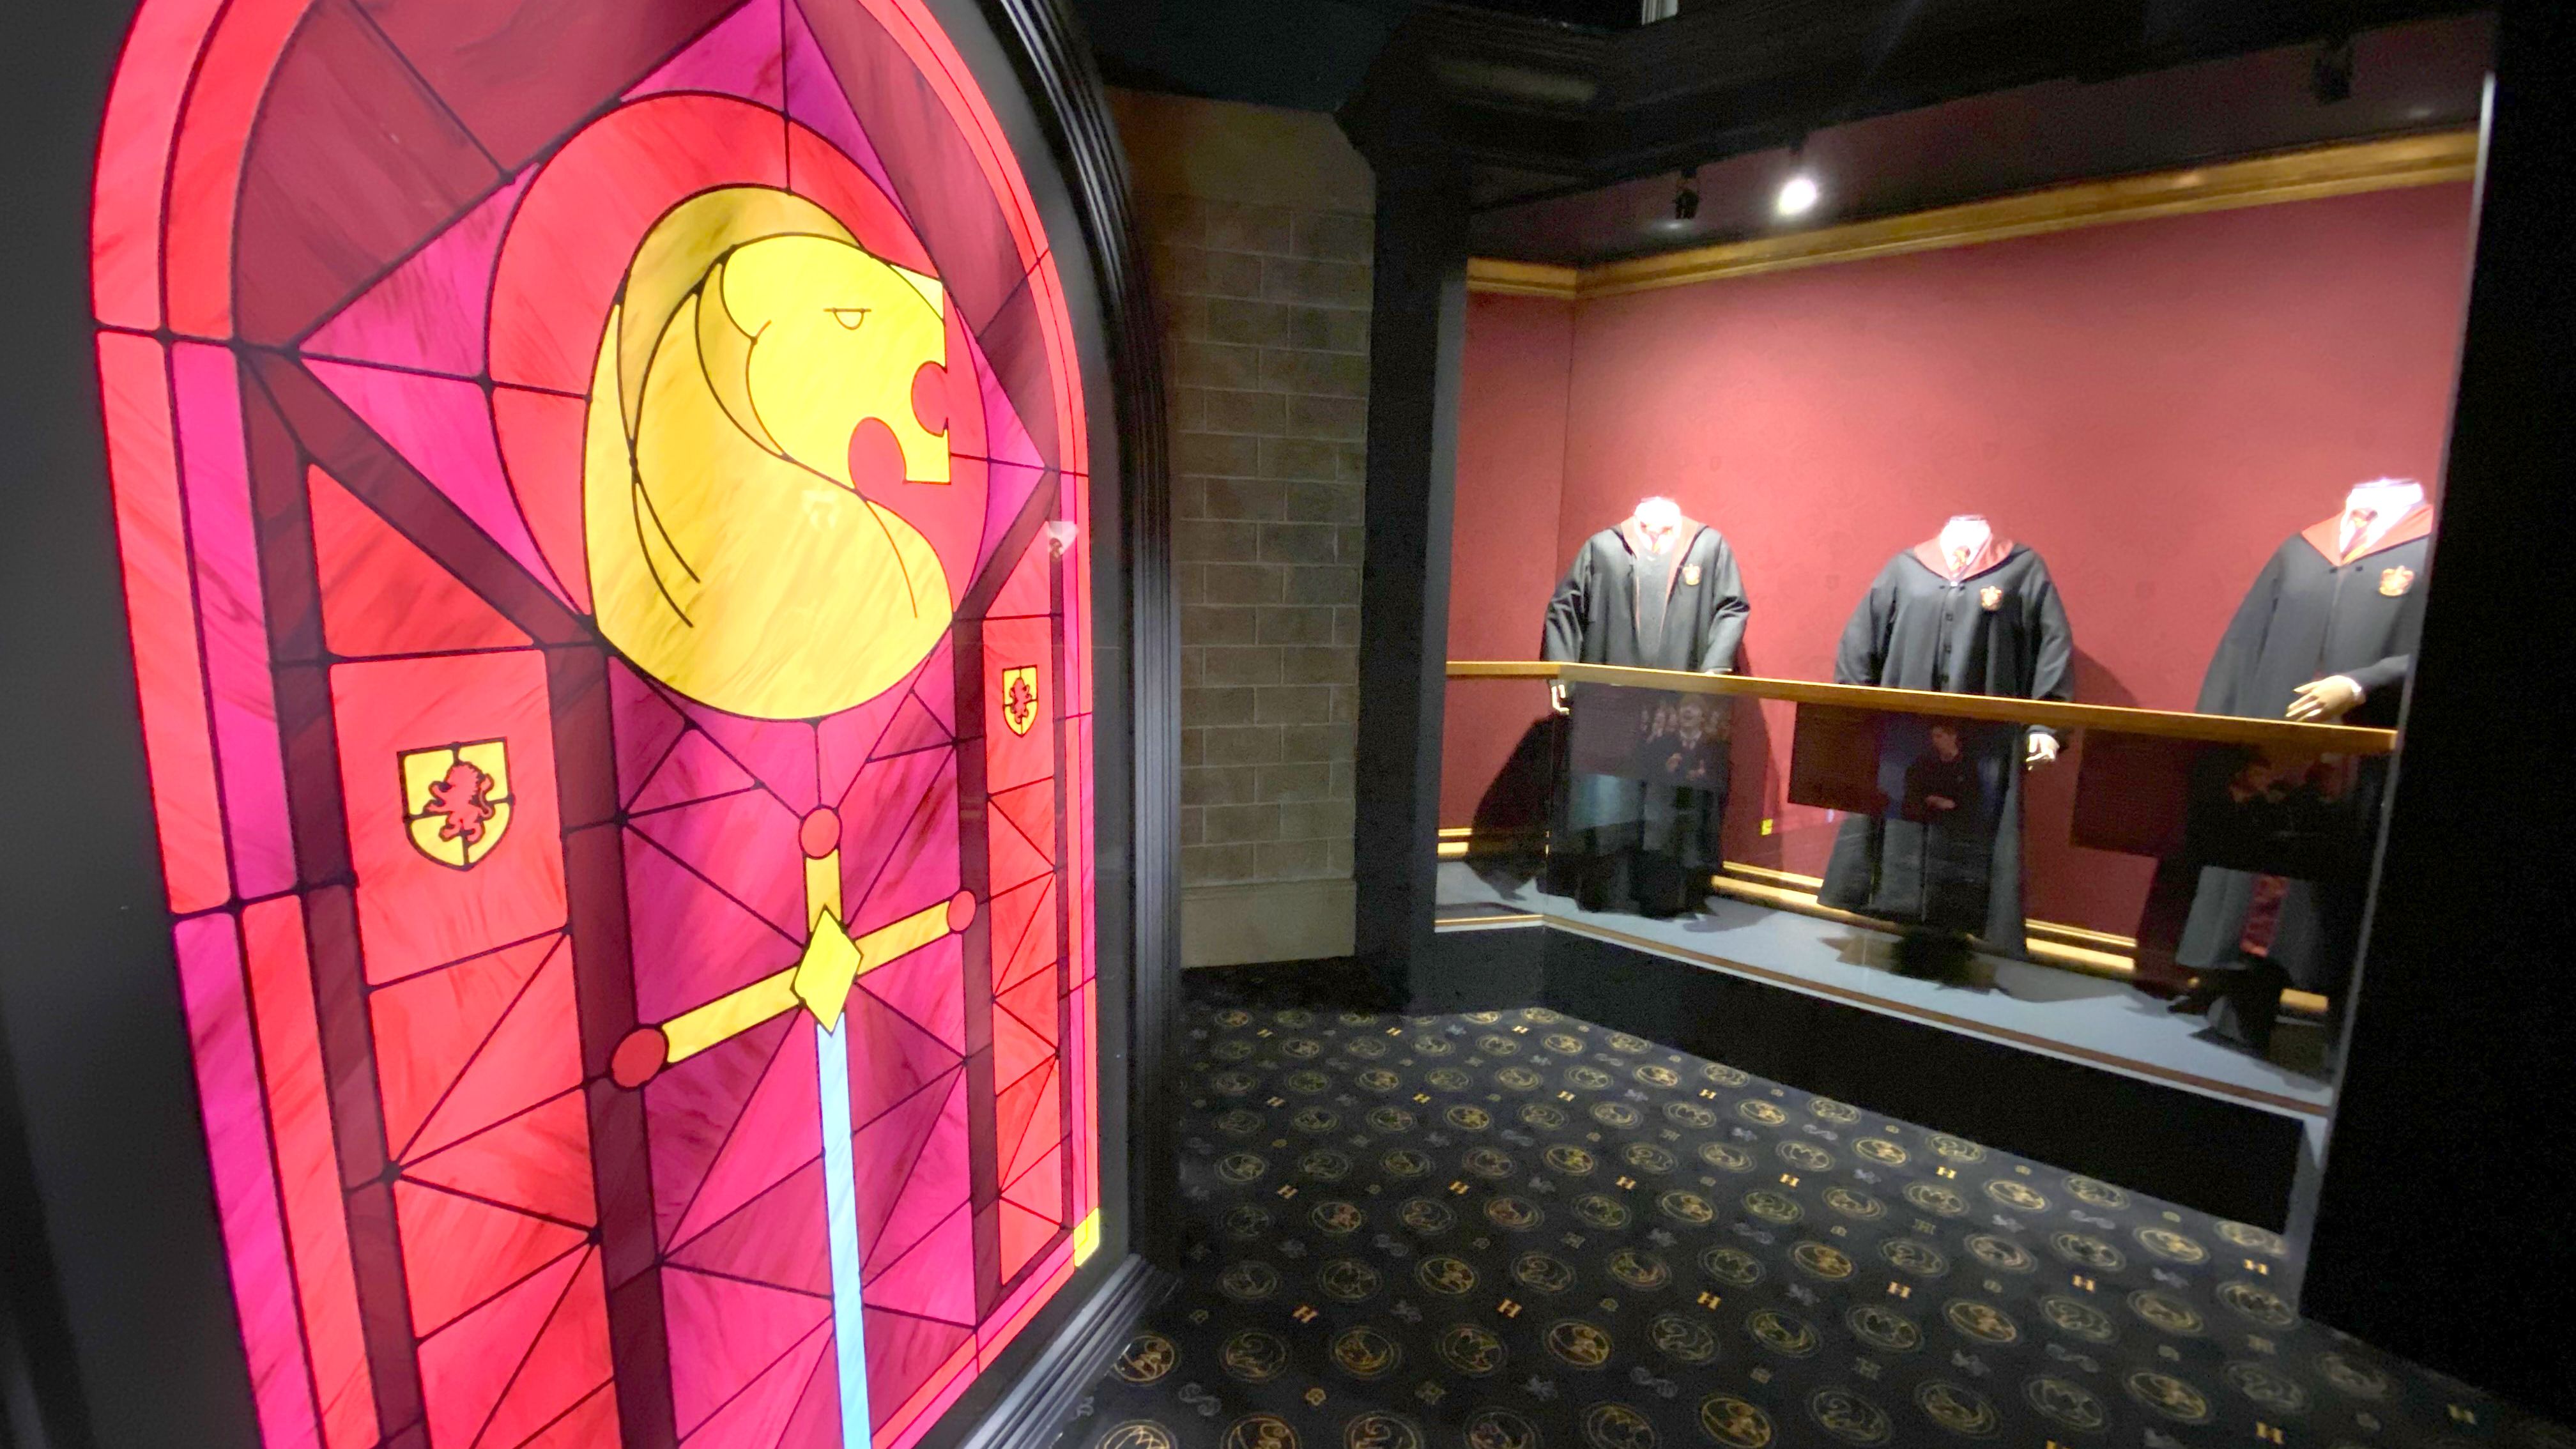 The Gryffindor section in the Hogwarts House Gallery. The gallery gives every house its own room for guests to explore. Photo: Taylor Allen/Axios 